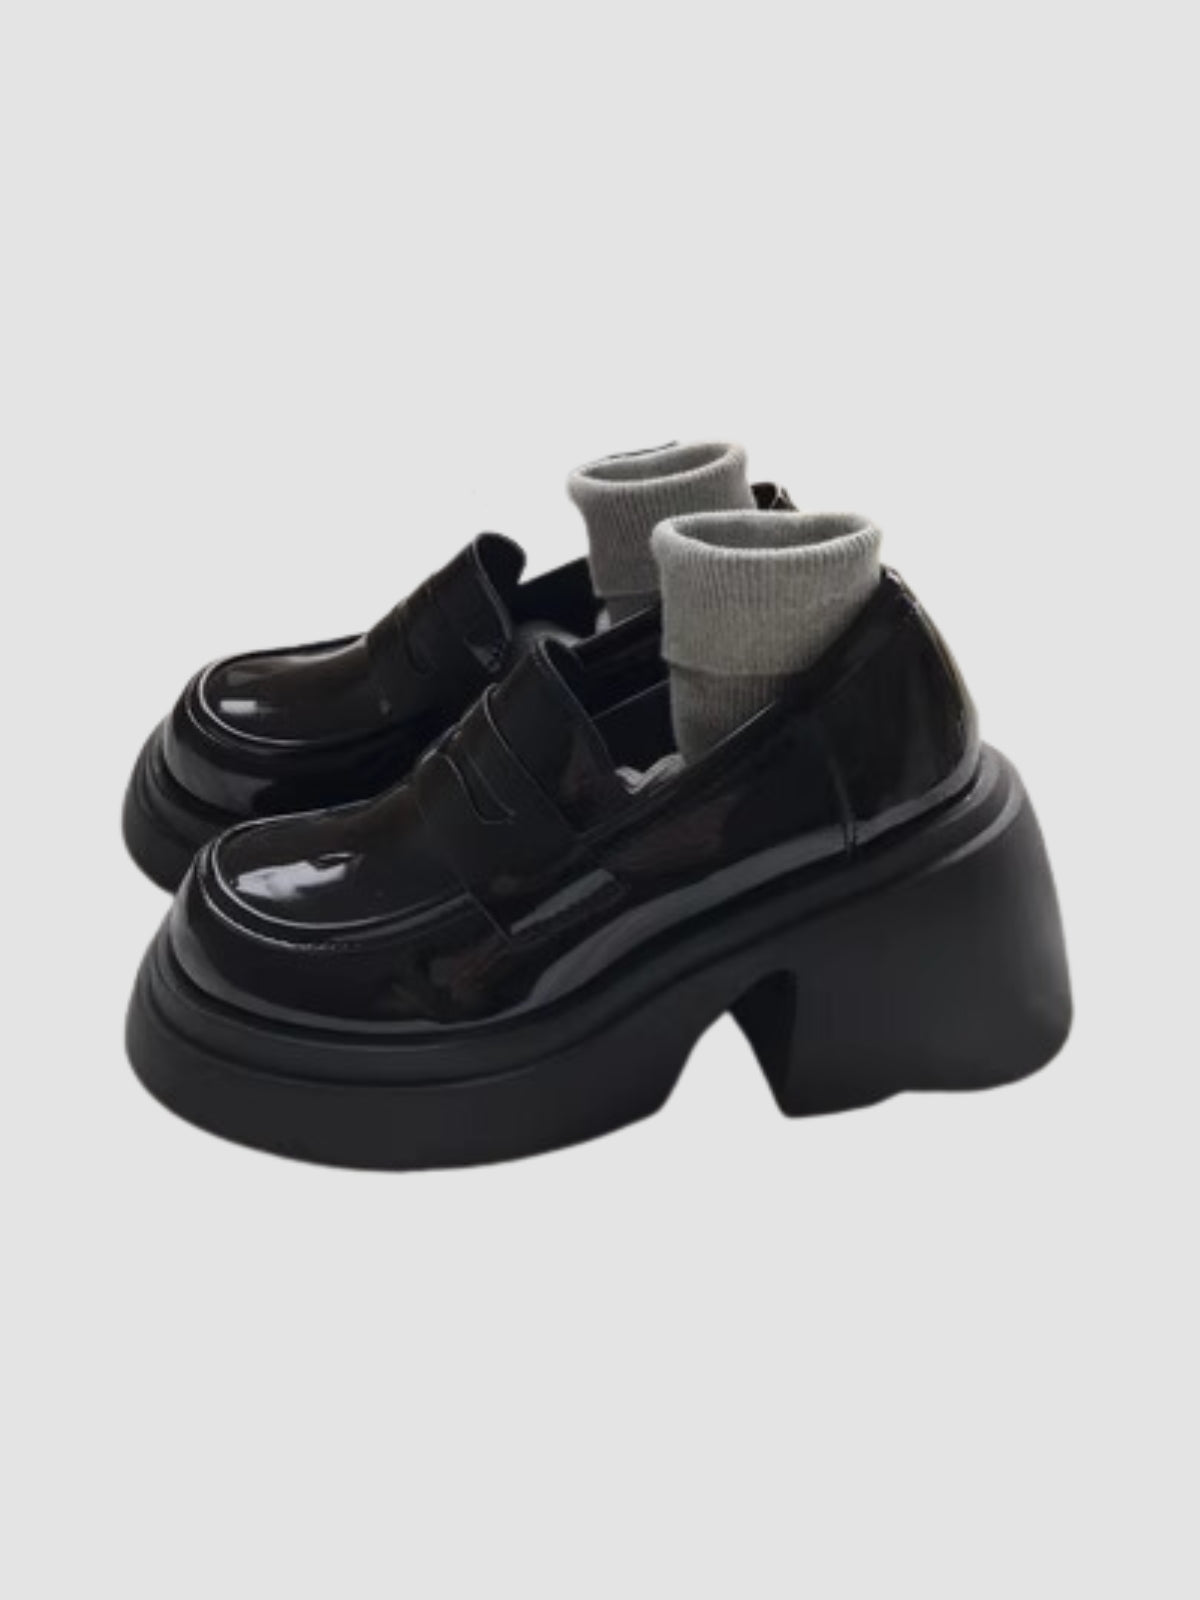 WLS Thick High Heeled Leather Women Shoes